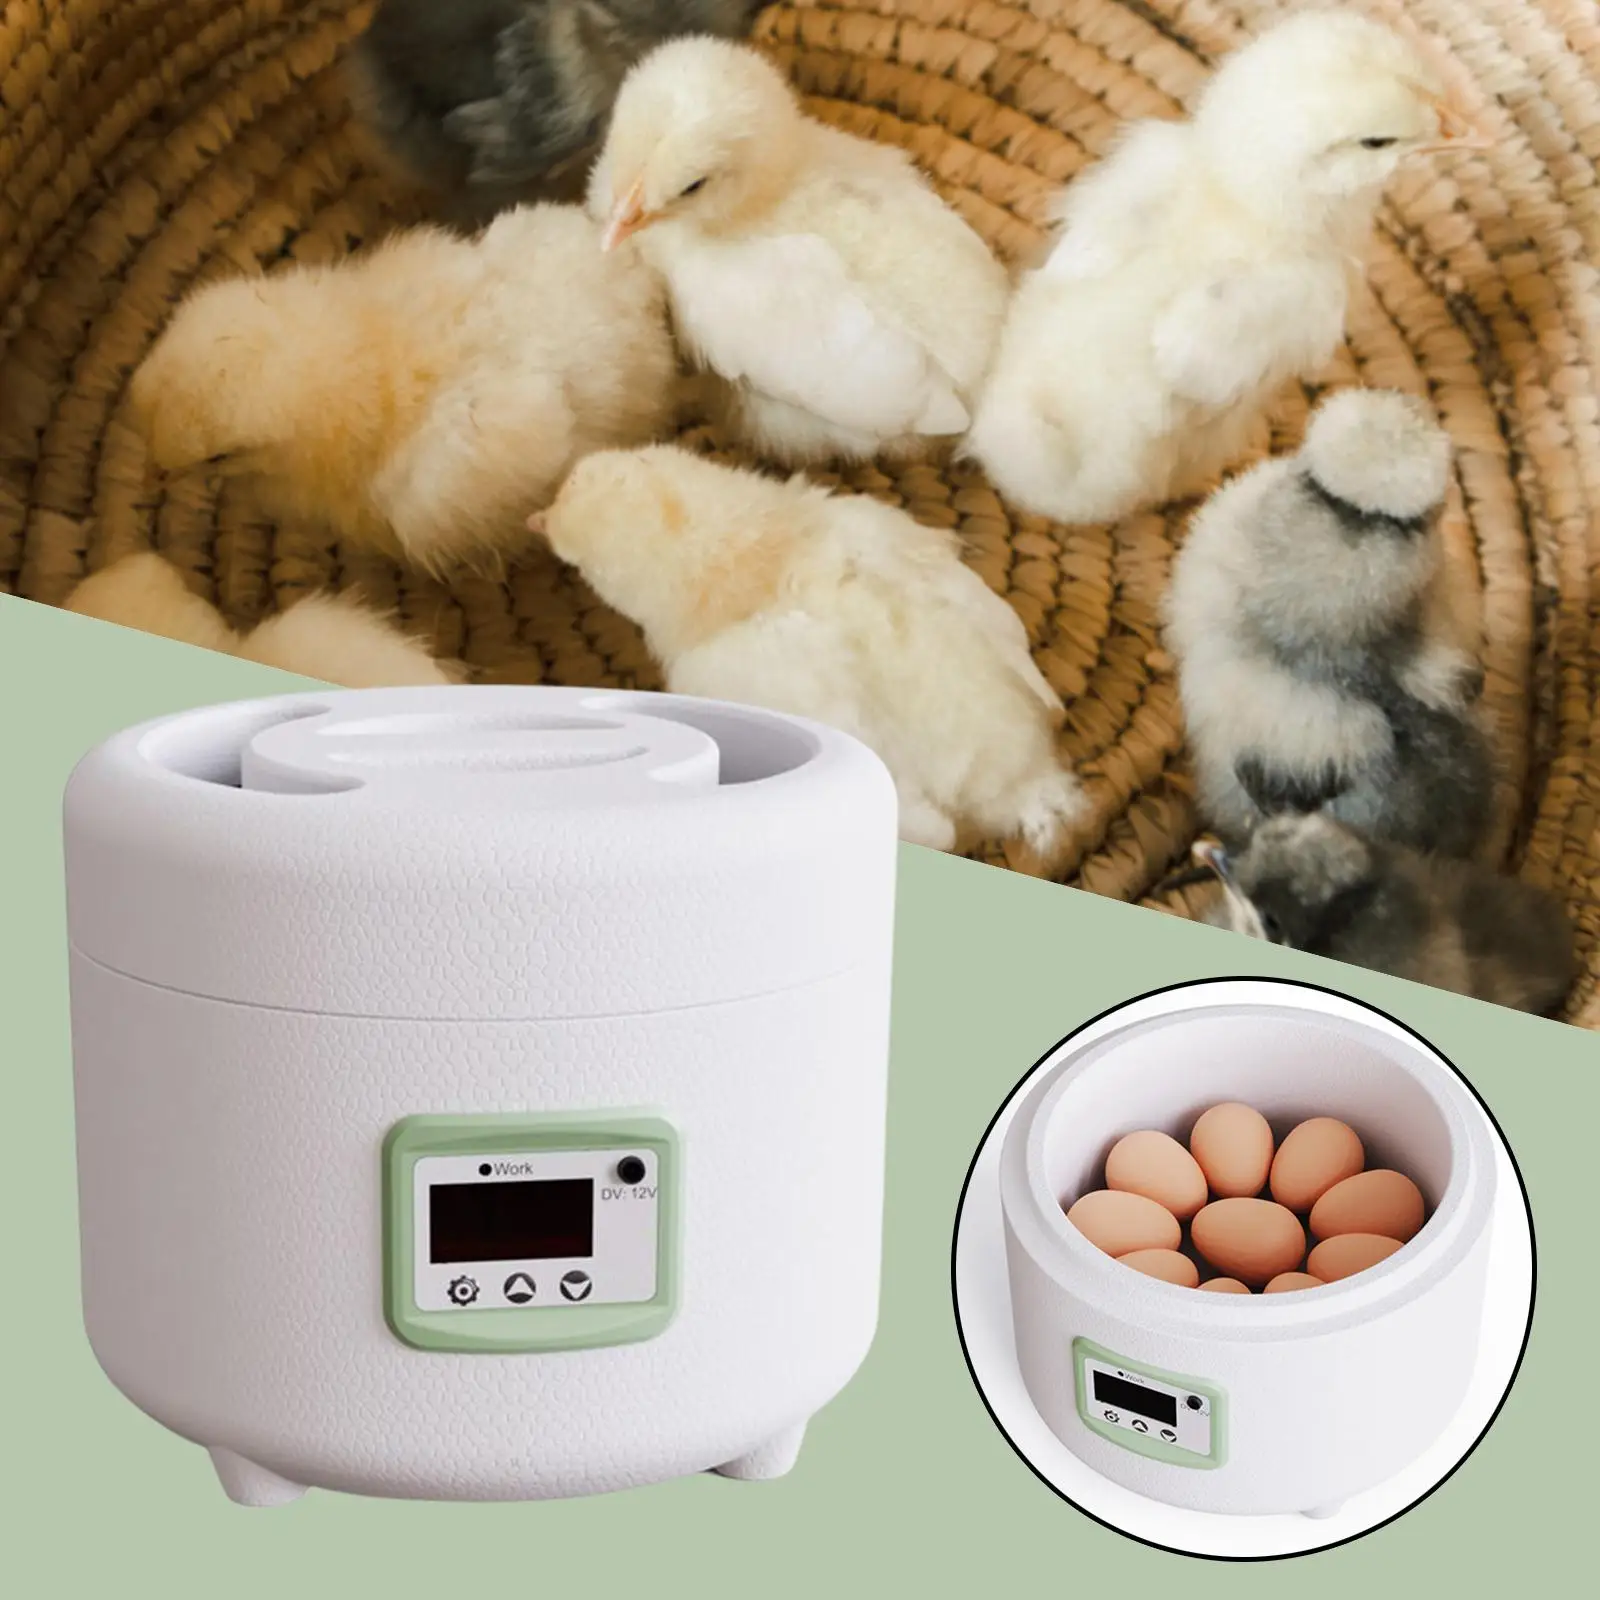 Portable Digital Automatic Egg Incubator Dual Power Small Poultry Hatcher for Hatching Parakeet Turkey Eggs Duck